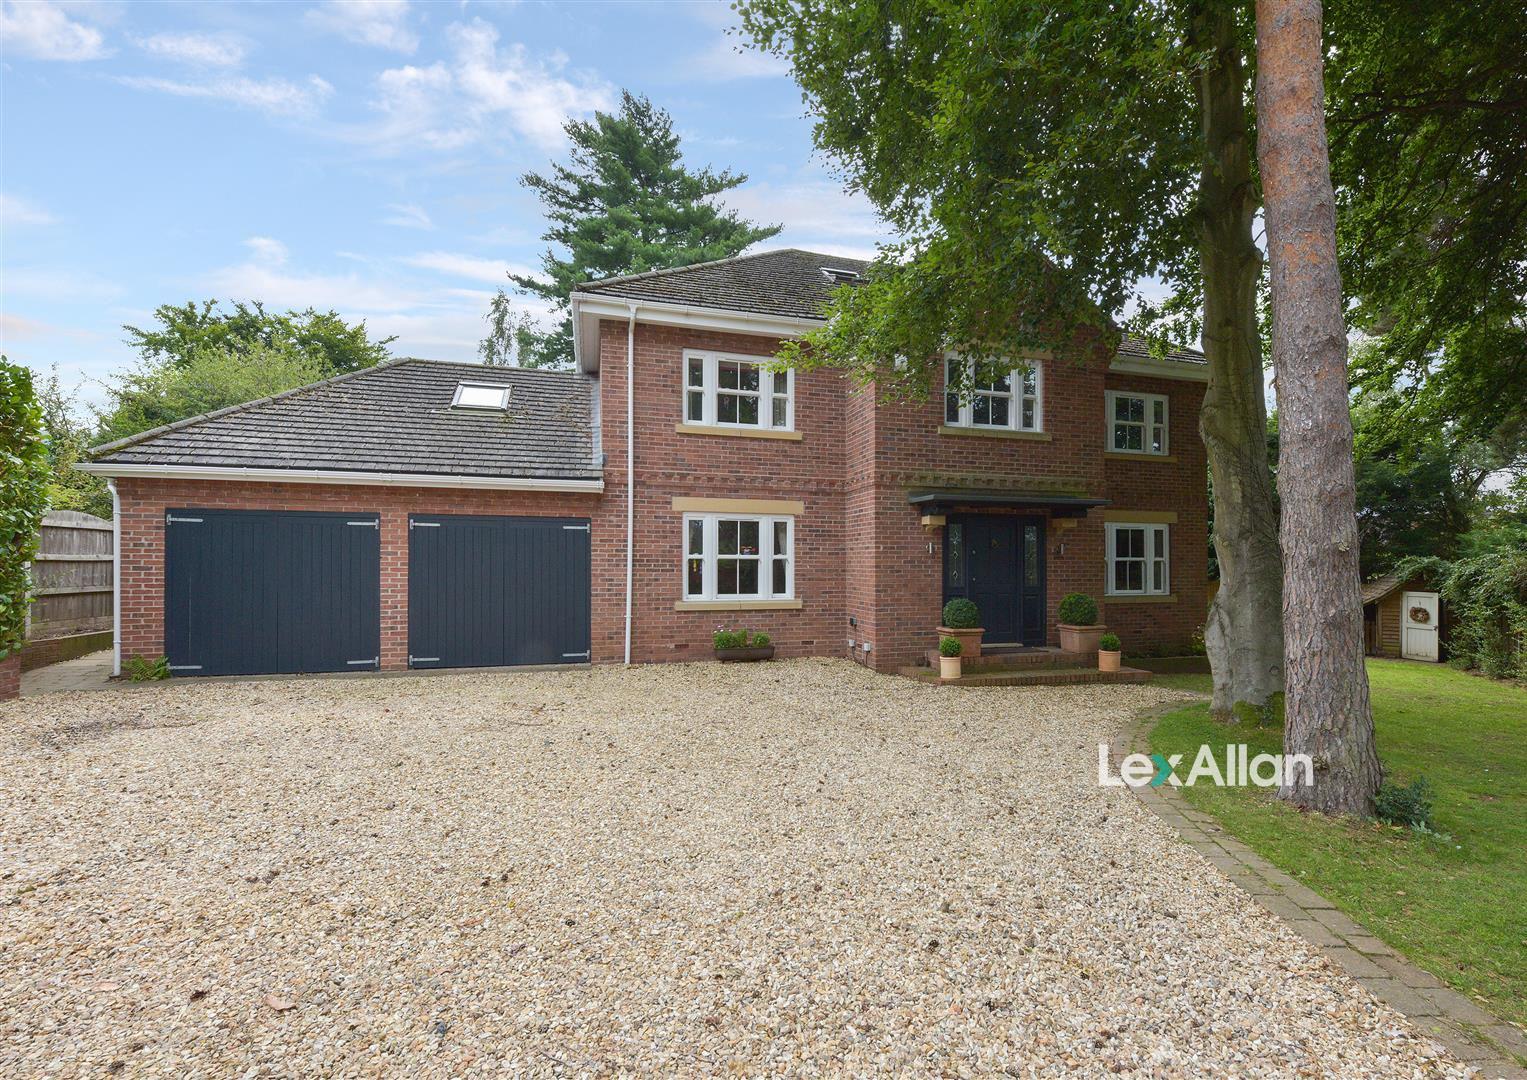 6 bed detached house for sale in Hampton Grove, Stourbridge - Property Image 1